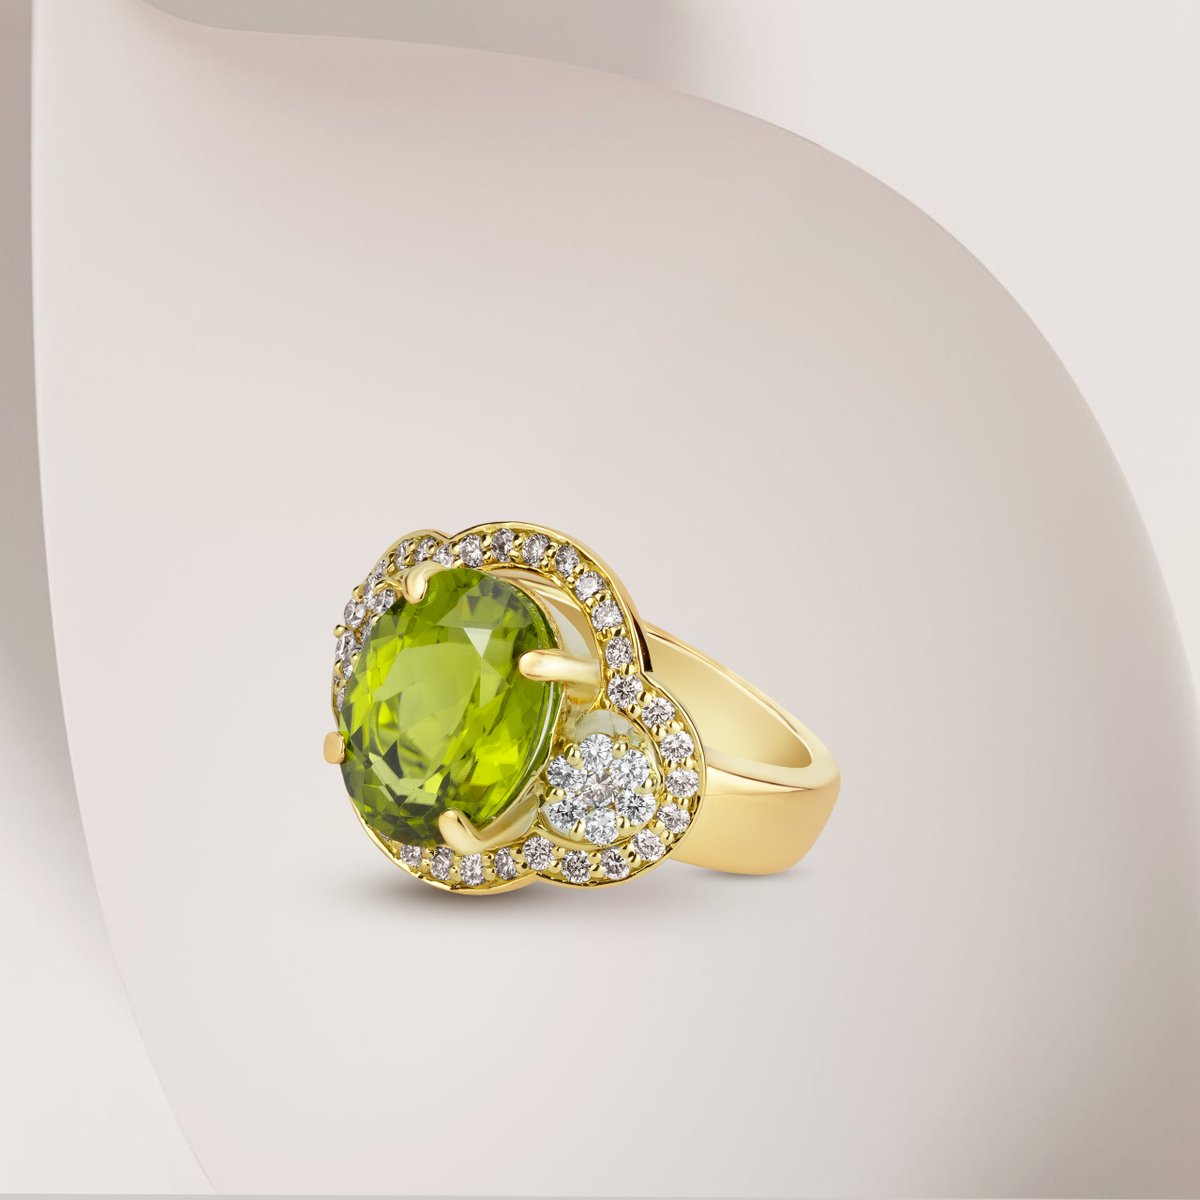 Dazzle in nature's brilliance with our Peridot and Diamond ring. Each sparkle tells a story of elegance and sophistication.
.
.
.
.
.
#singhvijewels #peridotring #diamondjewelry #gemstonerings #preciousstones #ringbling #jewelryaddiction #eleganceinjewels #fashionaccessories